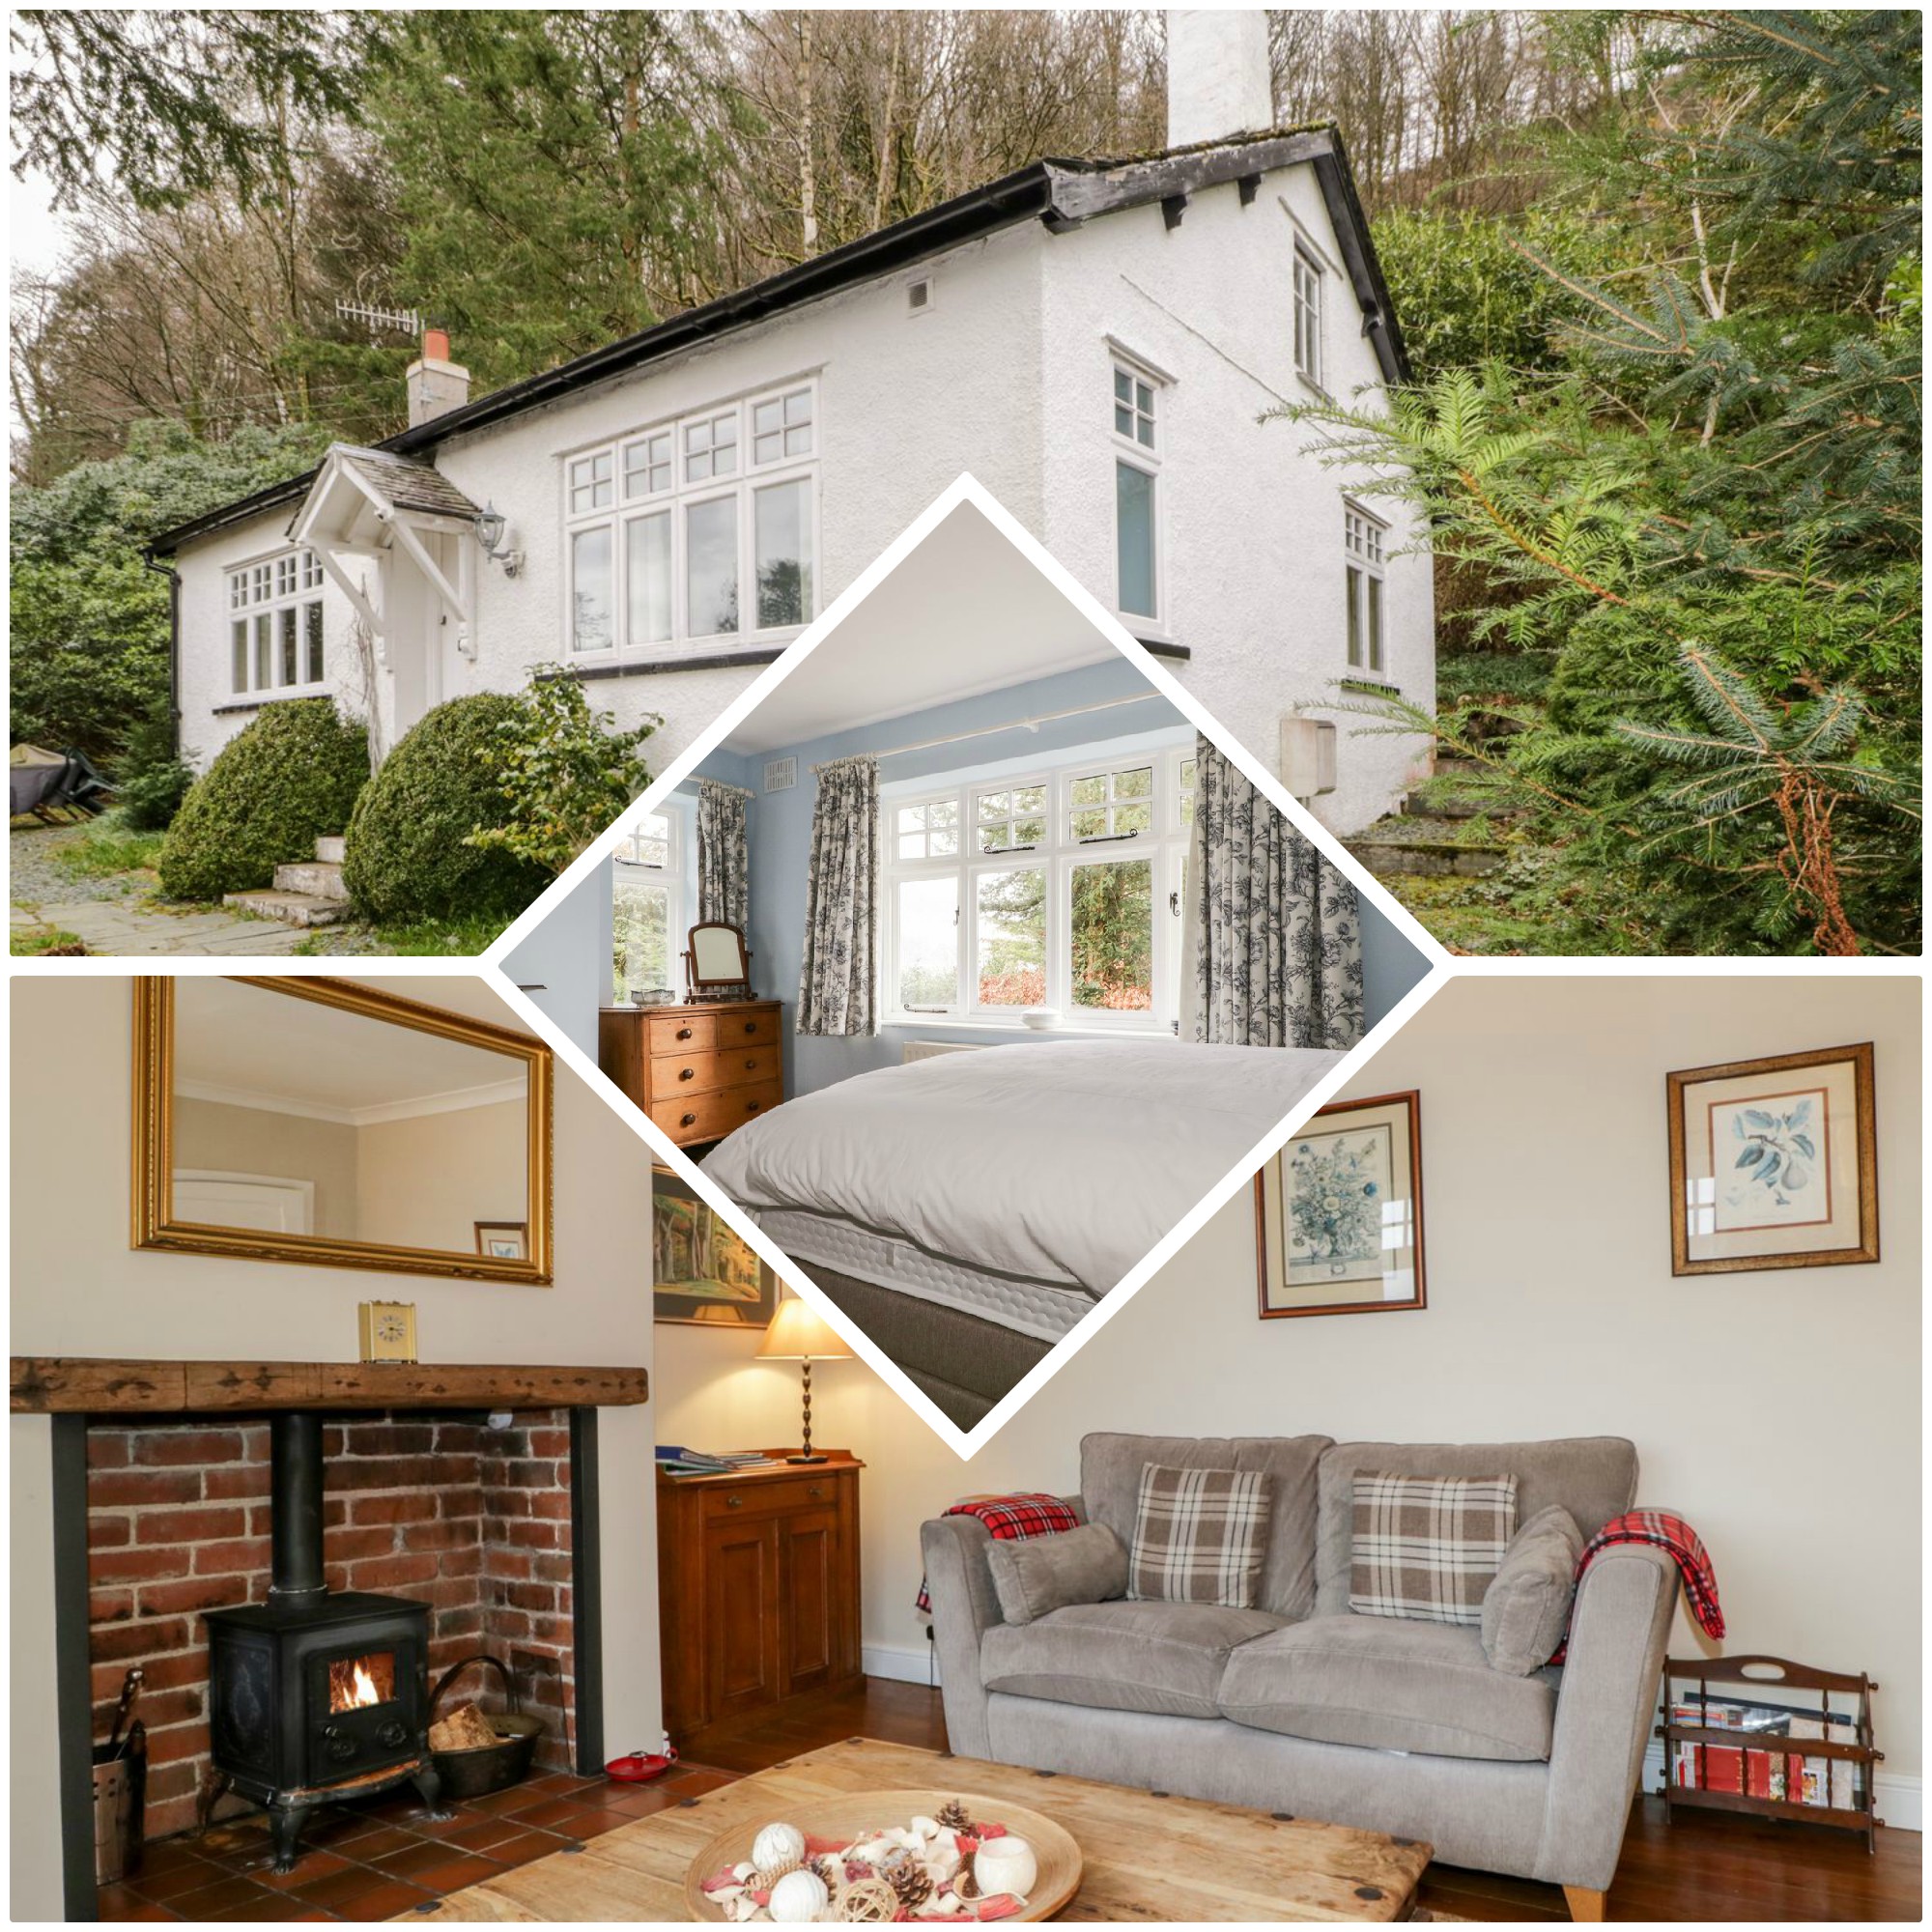 definitely a little more off the beaten track, this lovely Lakeland cottage has everything for a family of 4